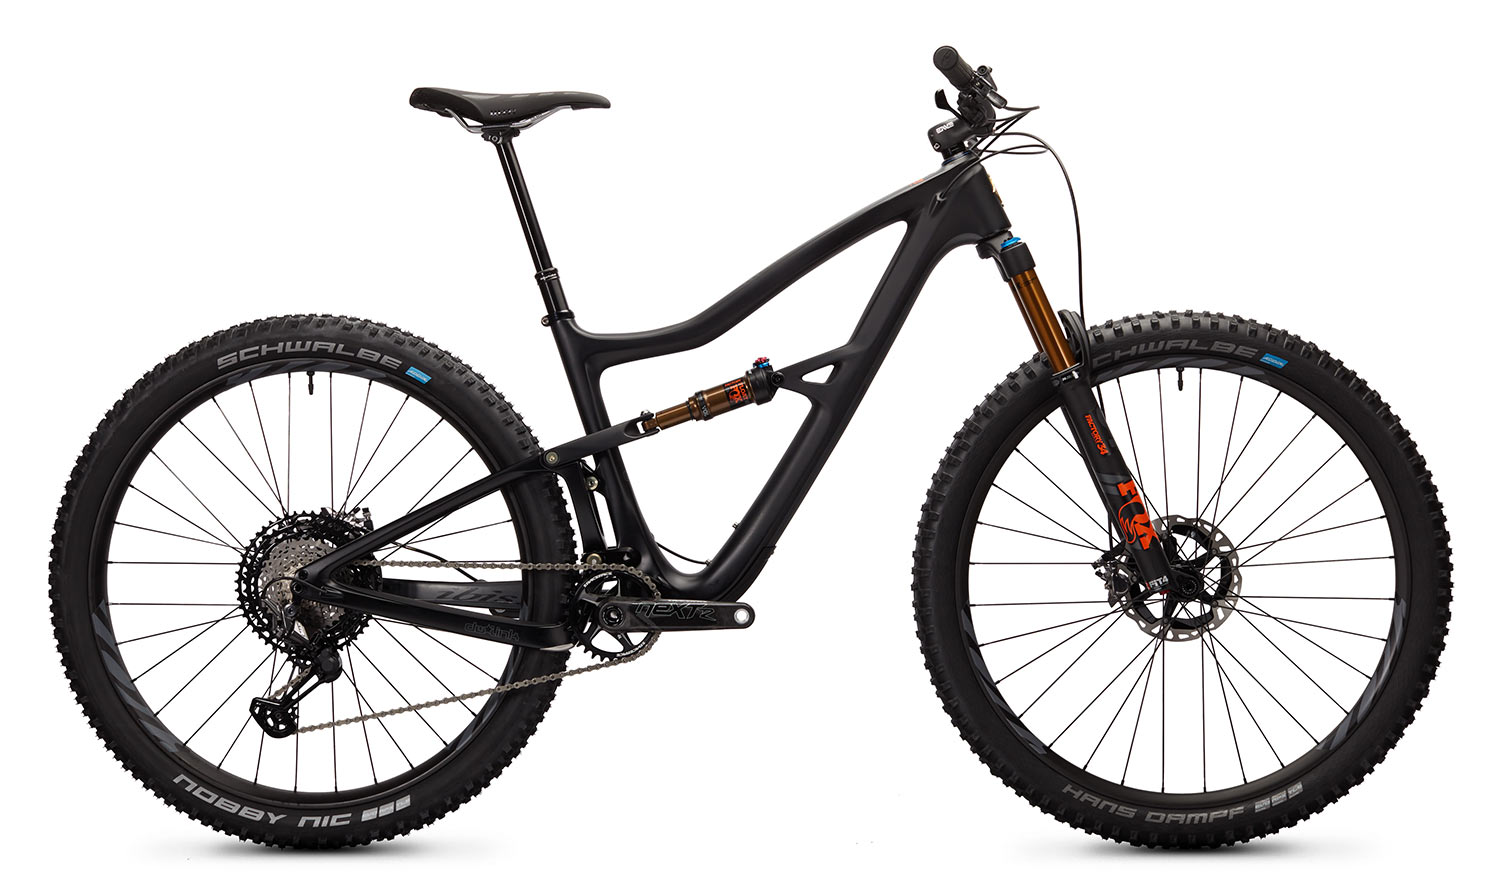 Ibis Ripley v4 trail mountain bike specs and pricing